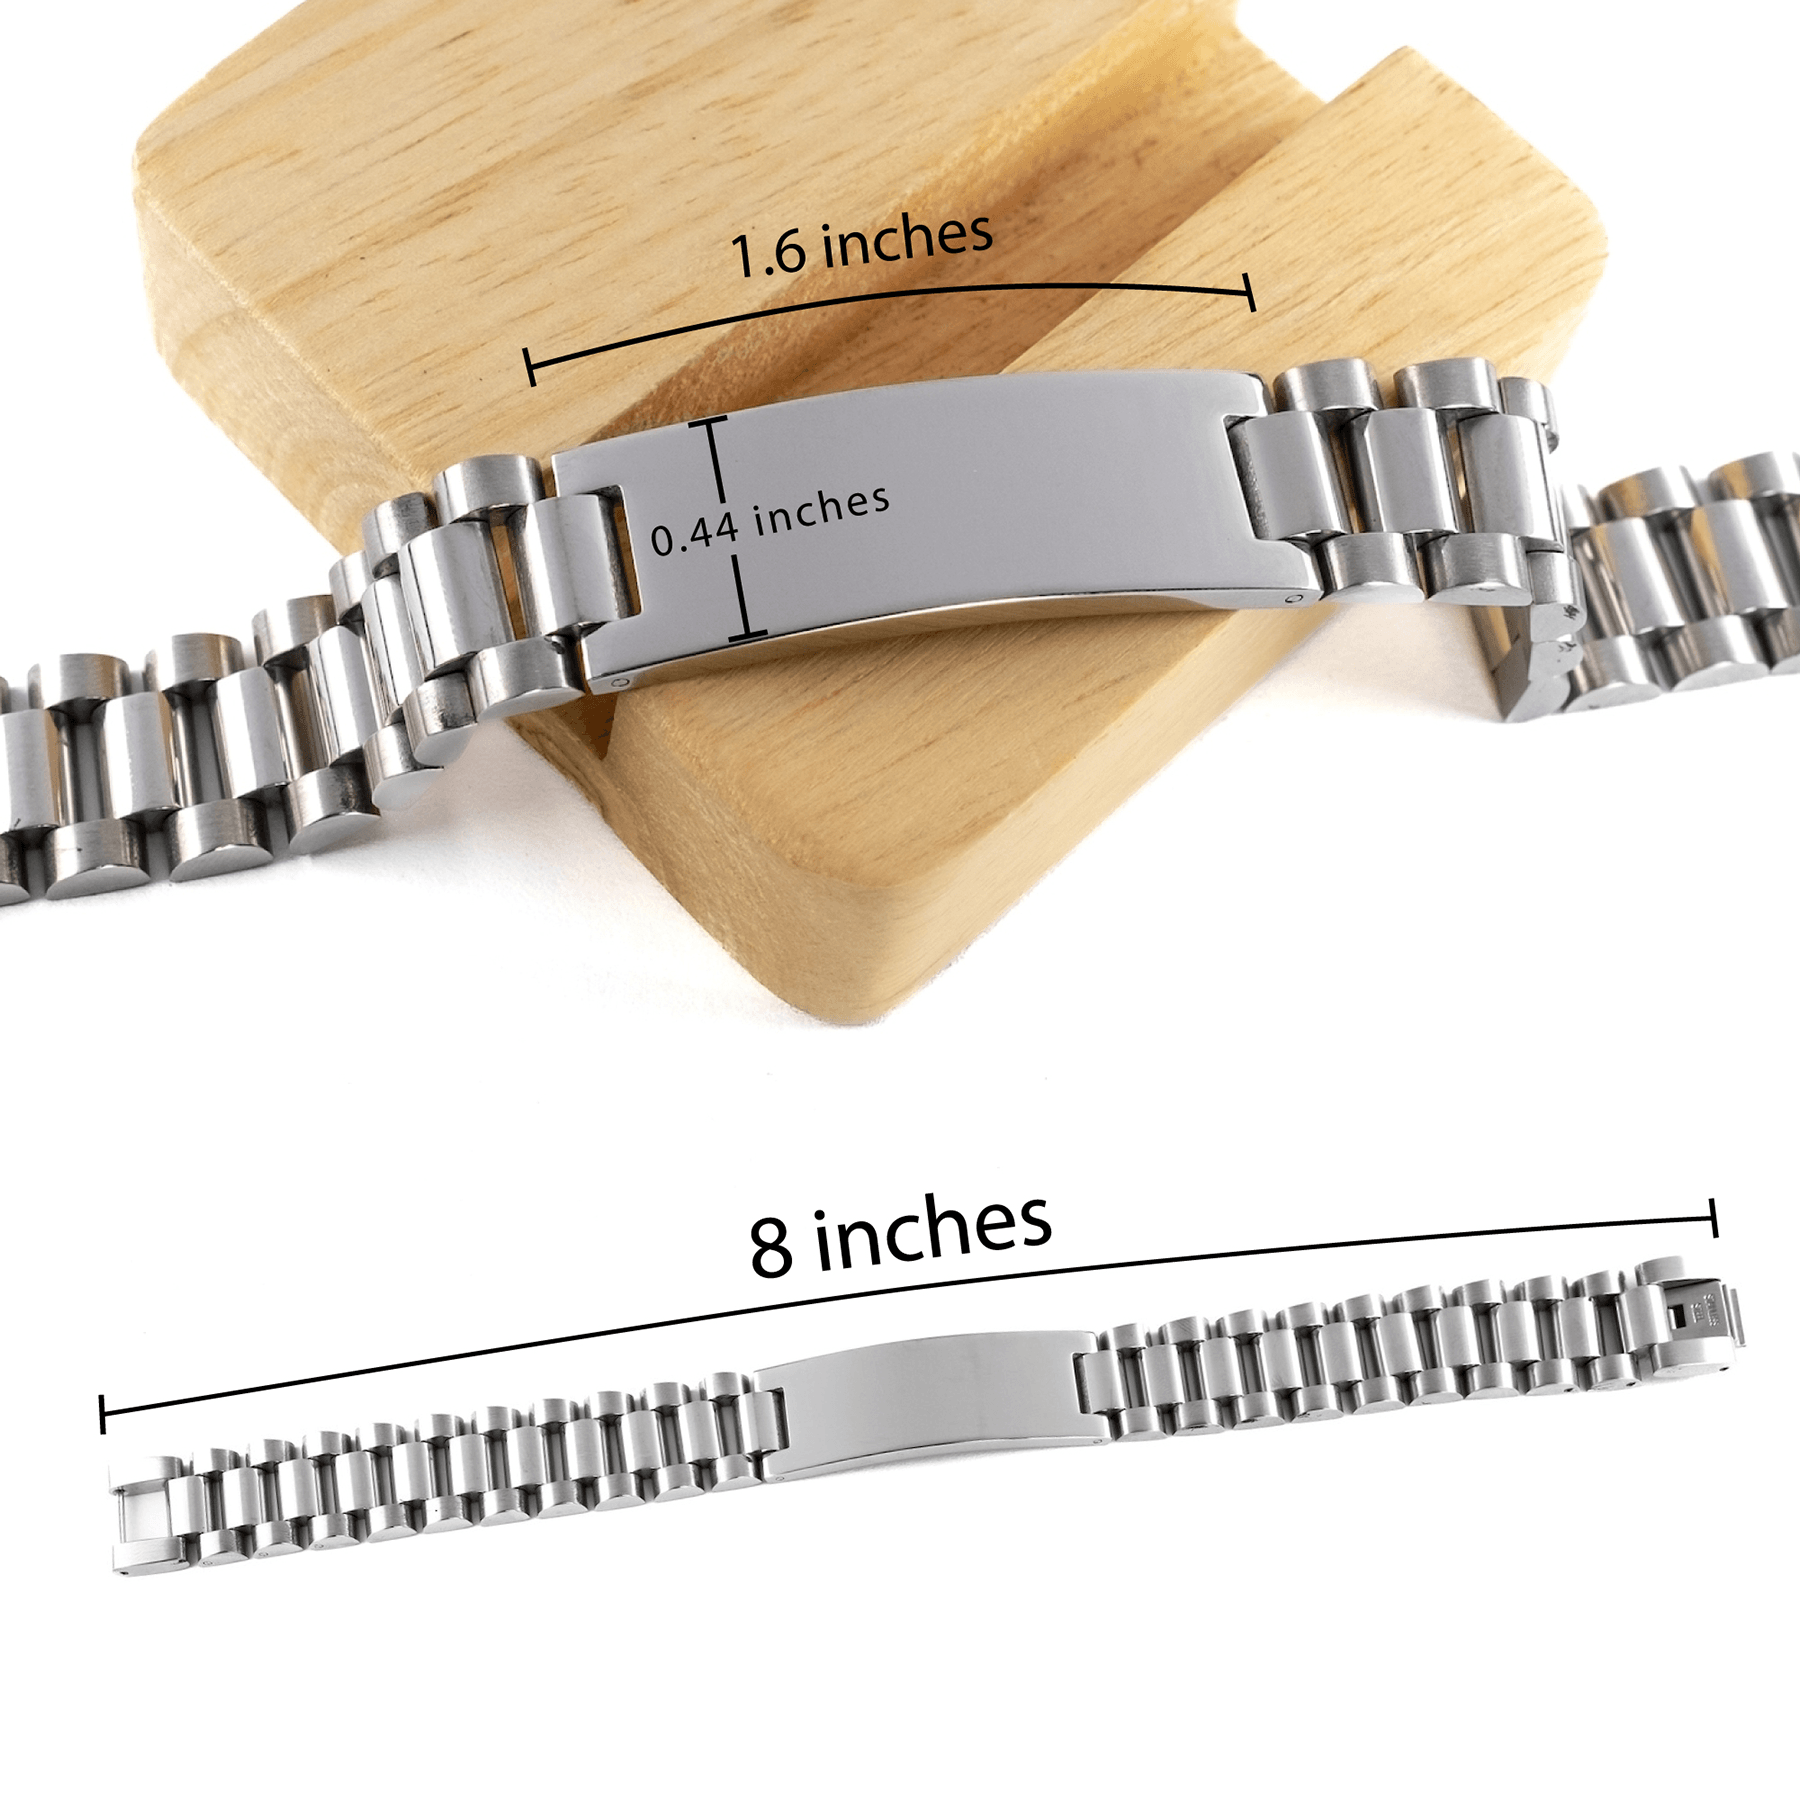 Mixologist Ladder Stainless Steel Engraved Bracelet - Thanks for being who you are - Birthday Christmas Jewelry Gifts Coworkers Colleague Boss - Mallard Moon Gift Shop